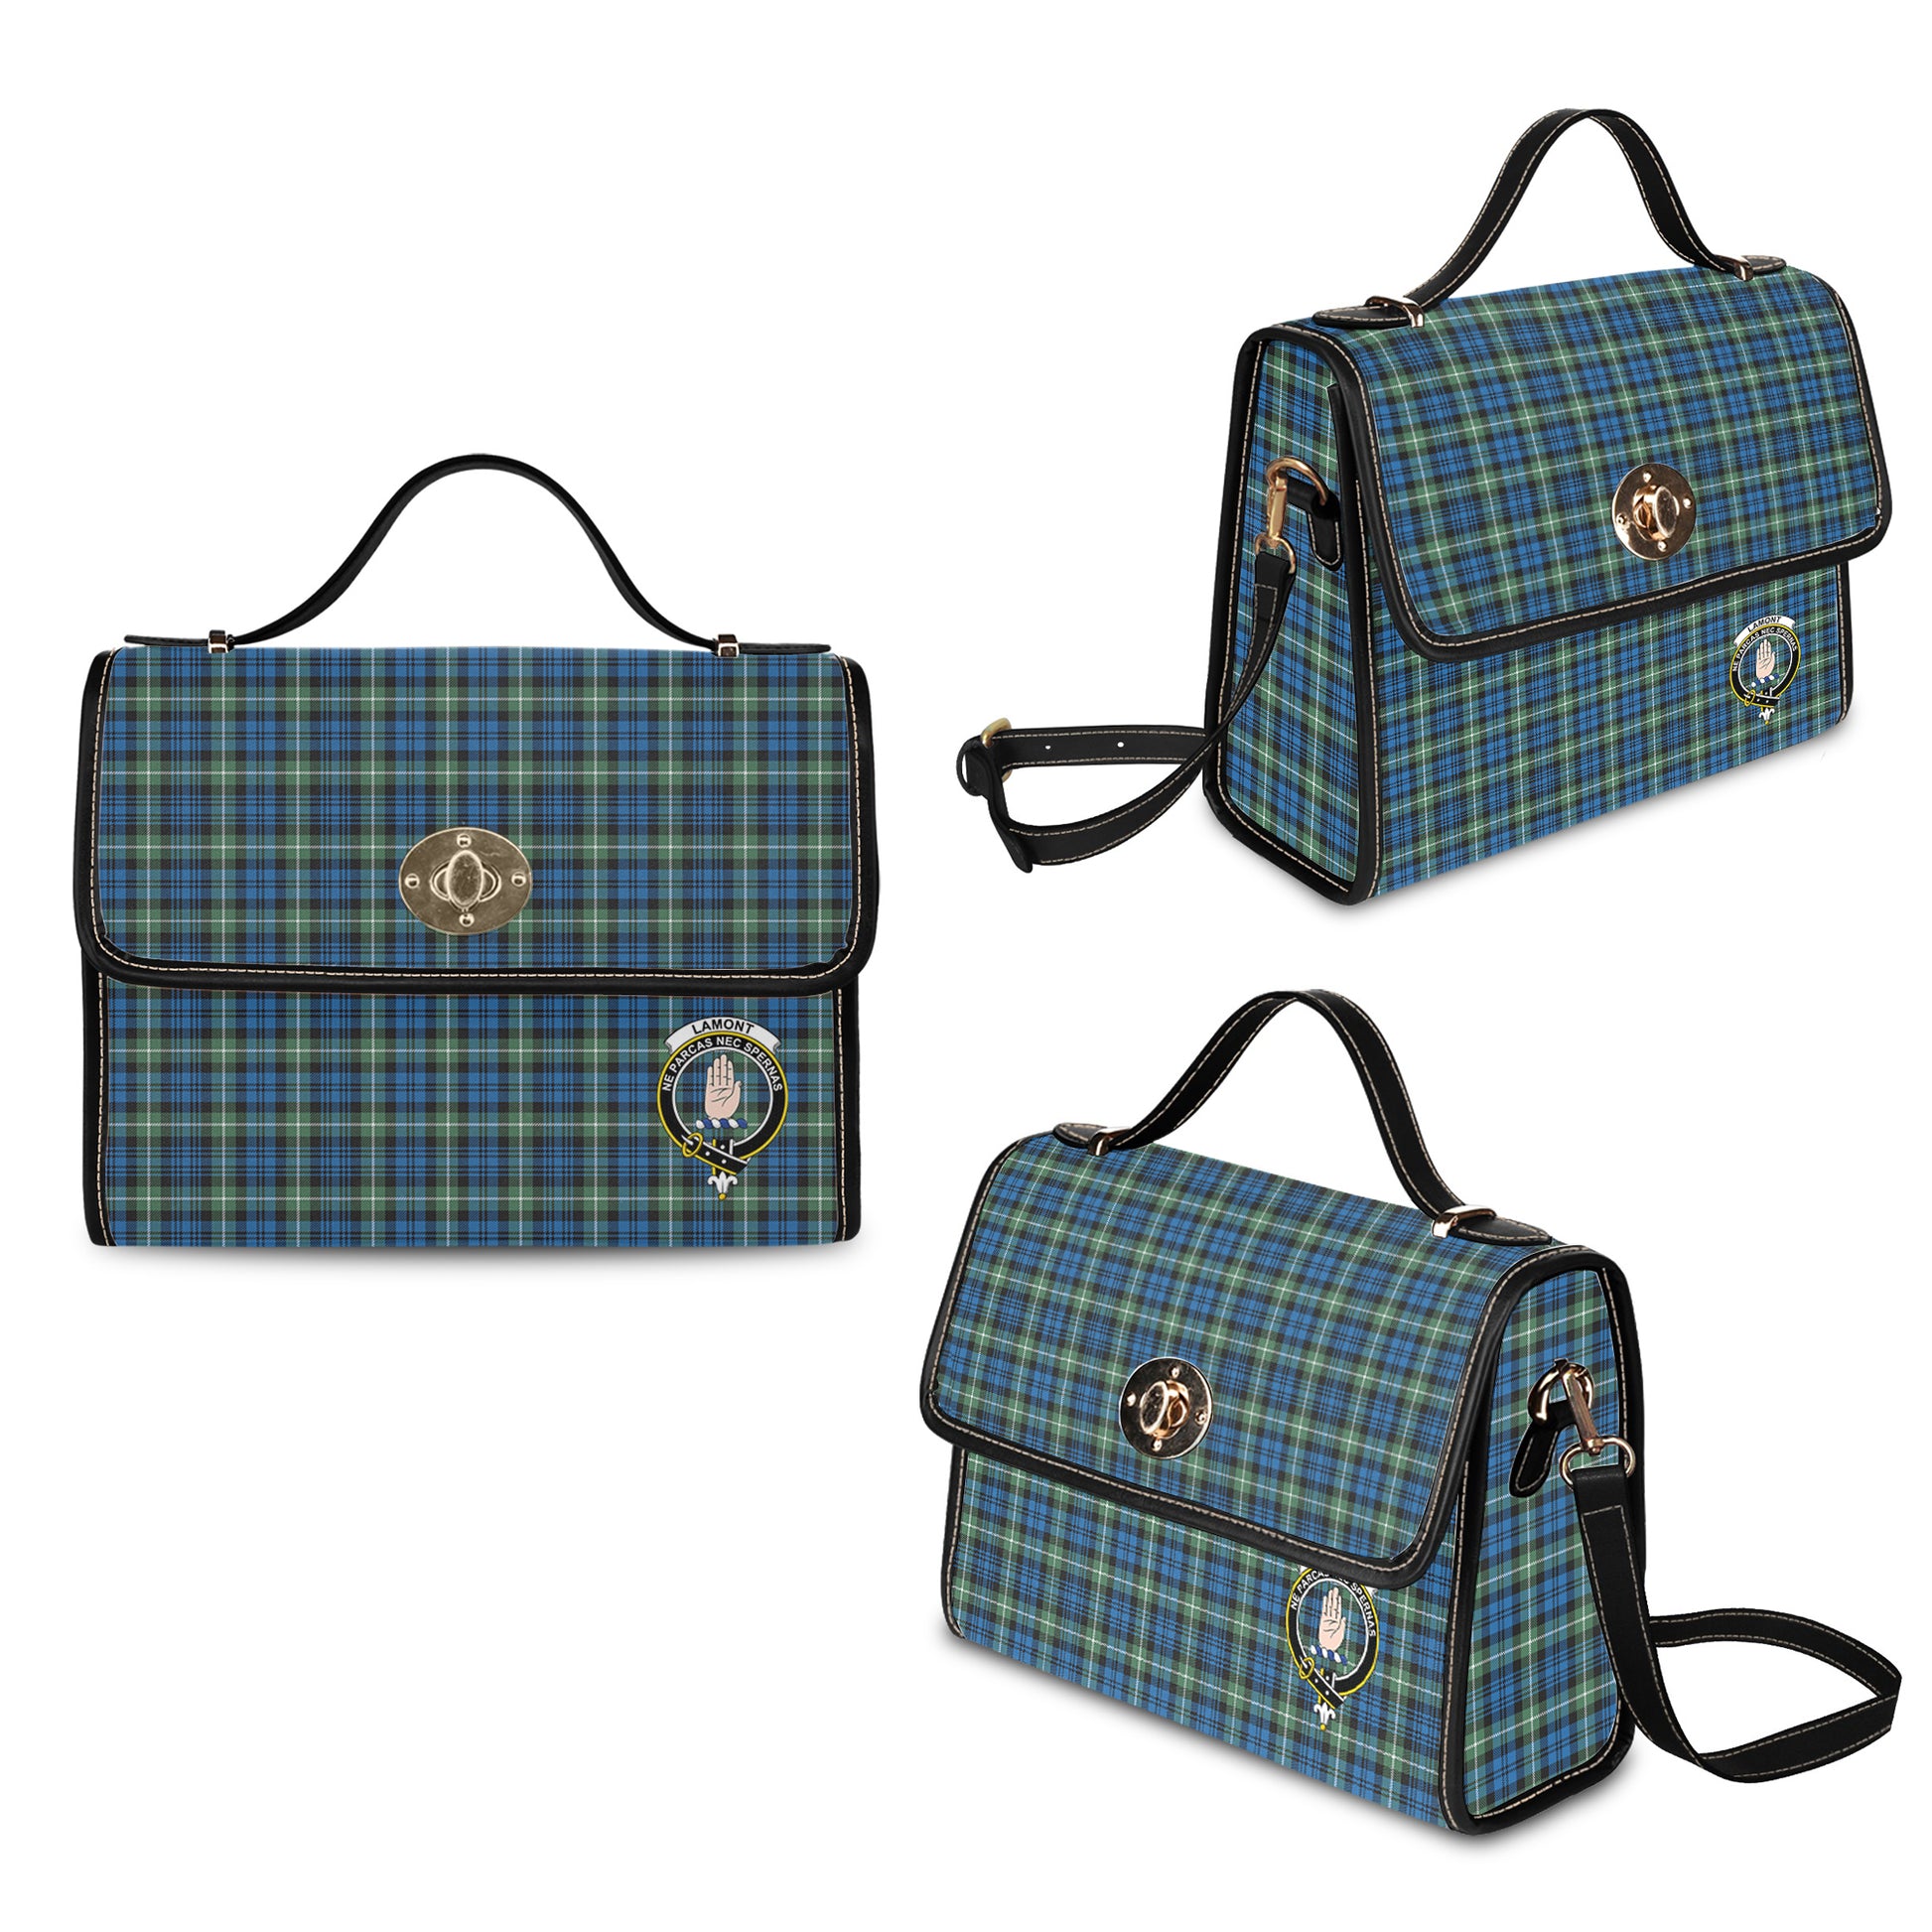 lamont-ancient-tartan-leather-strap-waterproof-canvas-bag-with-family-crest